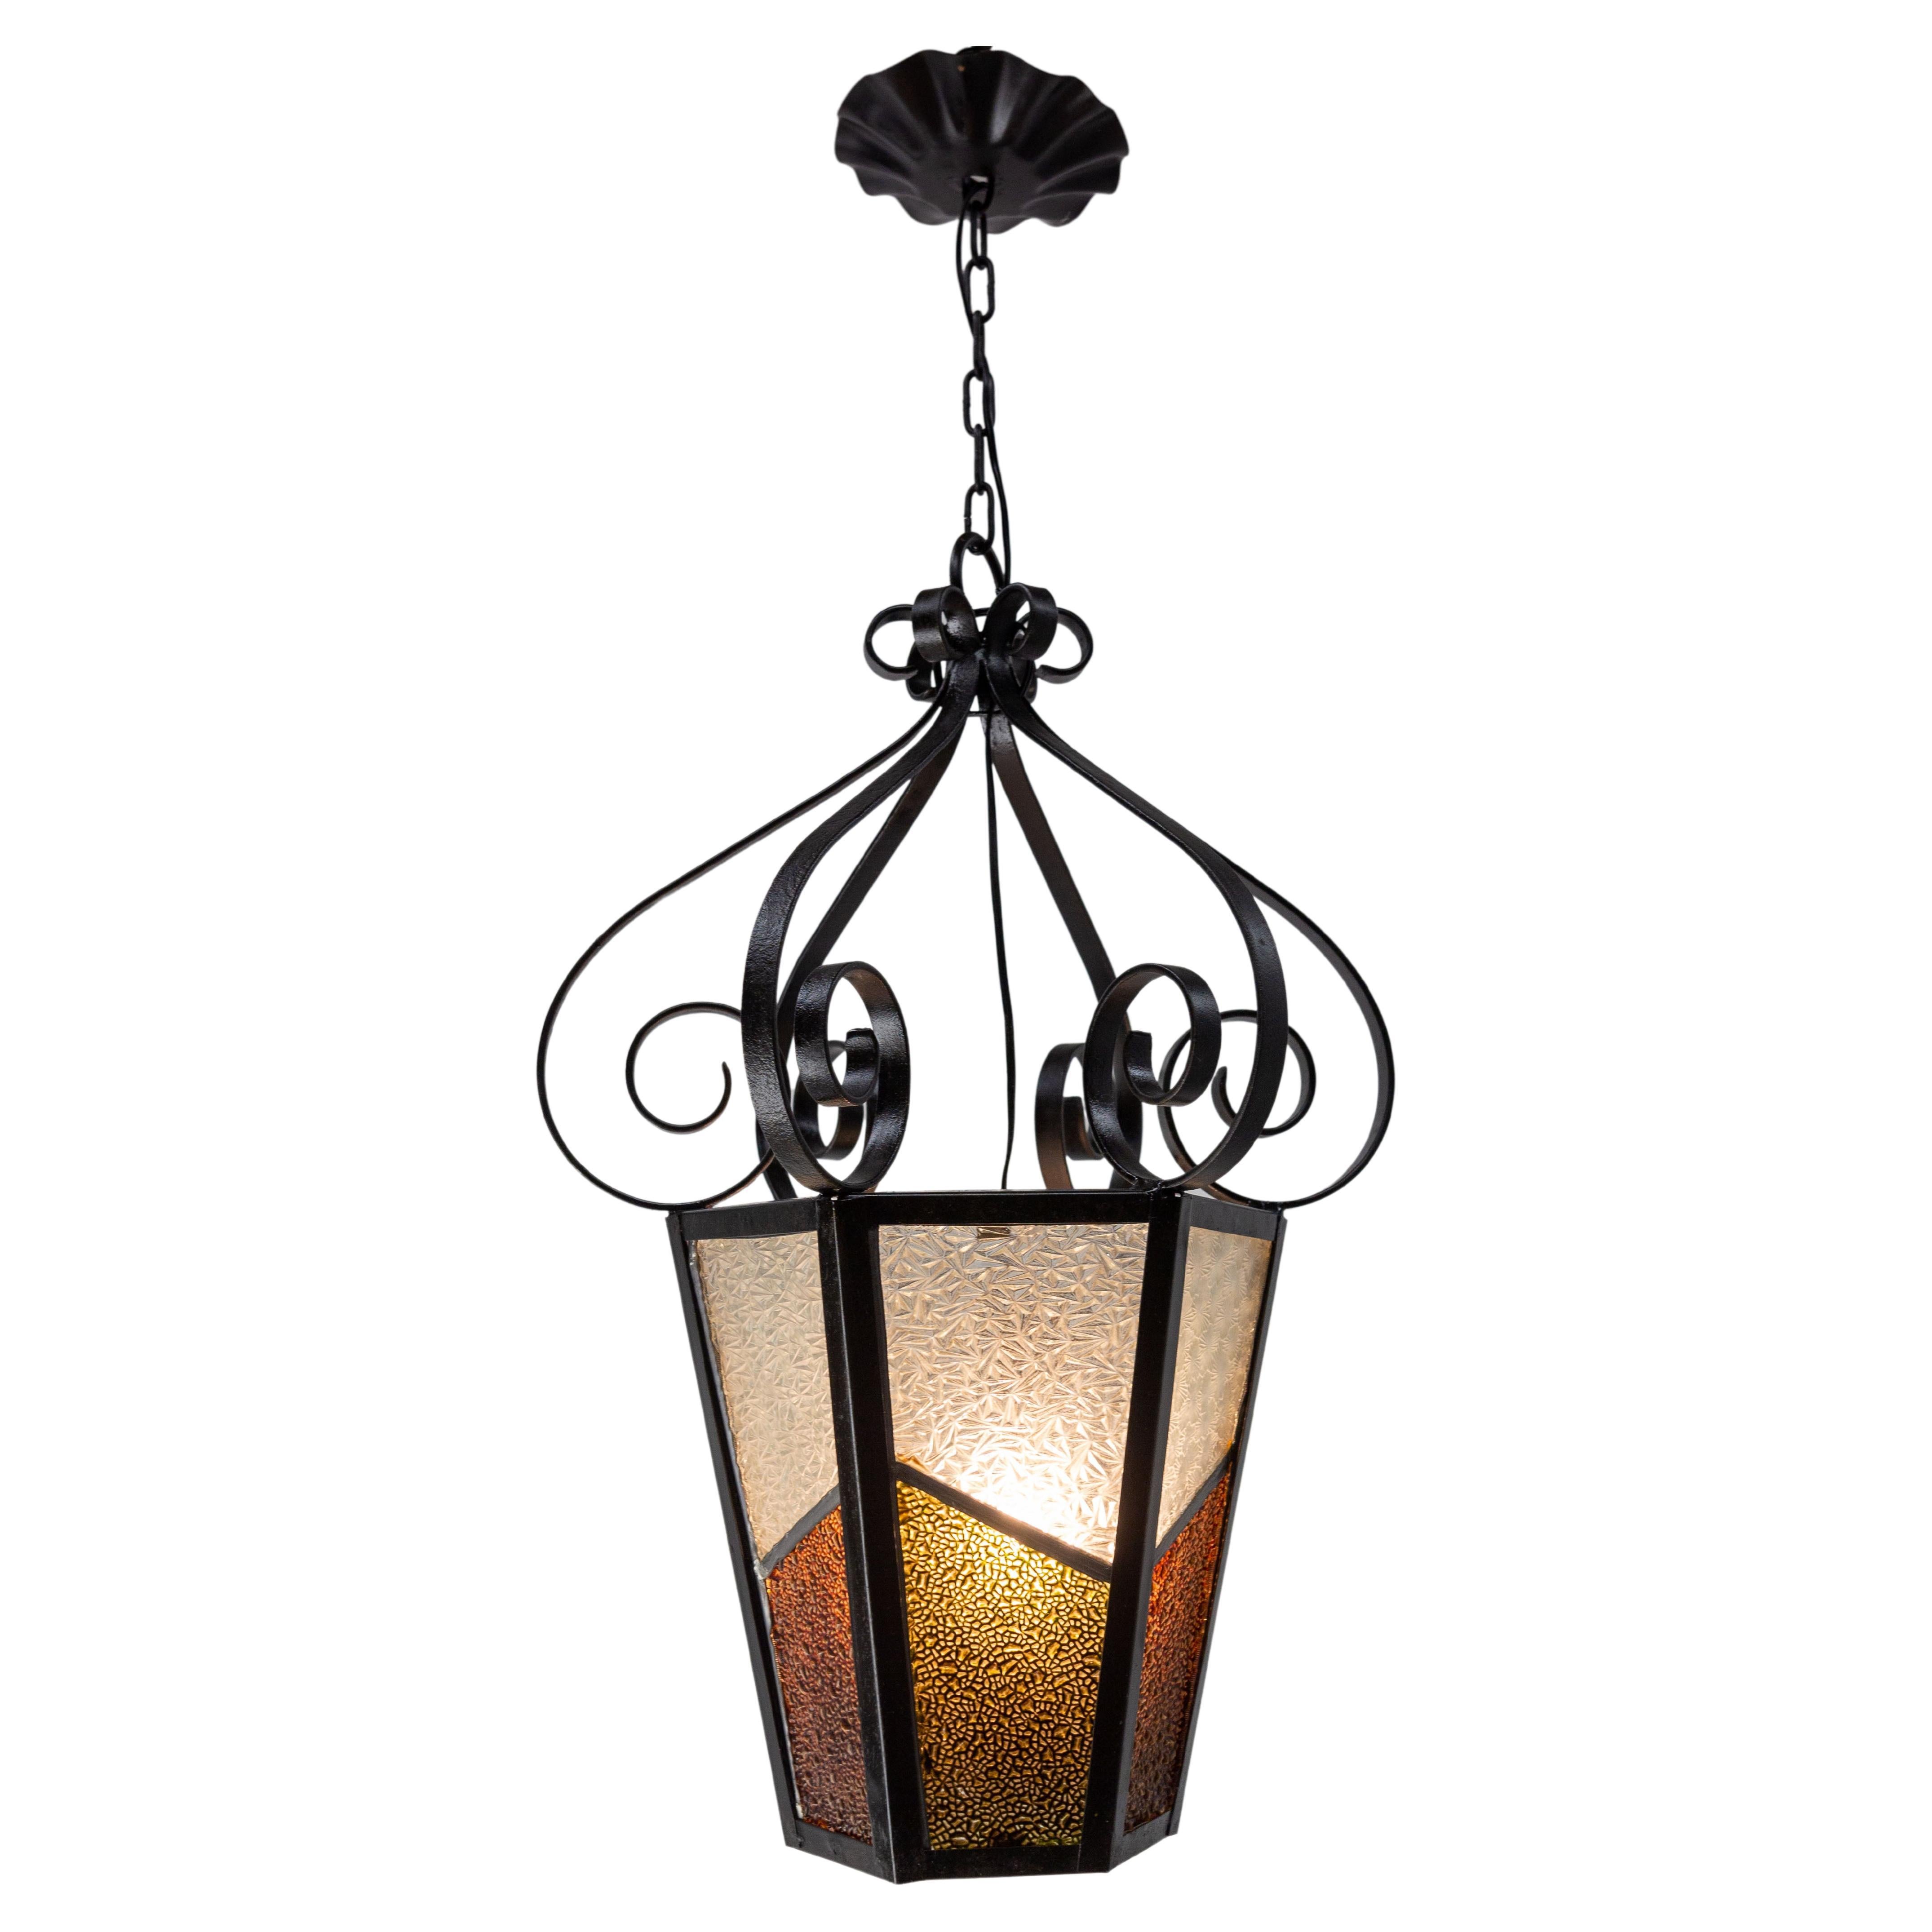 Iron Textured & Colored Glass Ceiling Lamp Lustre French Lantern, circa 1960